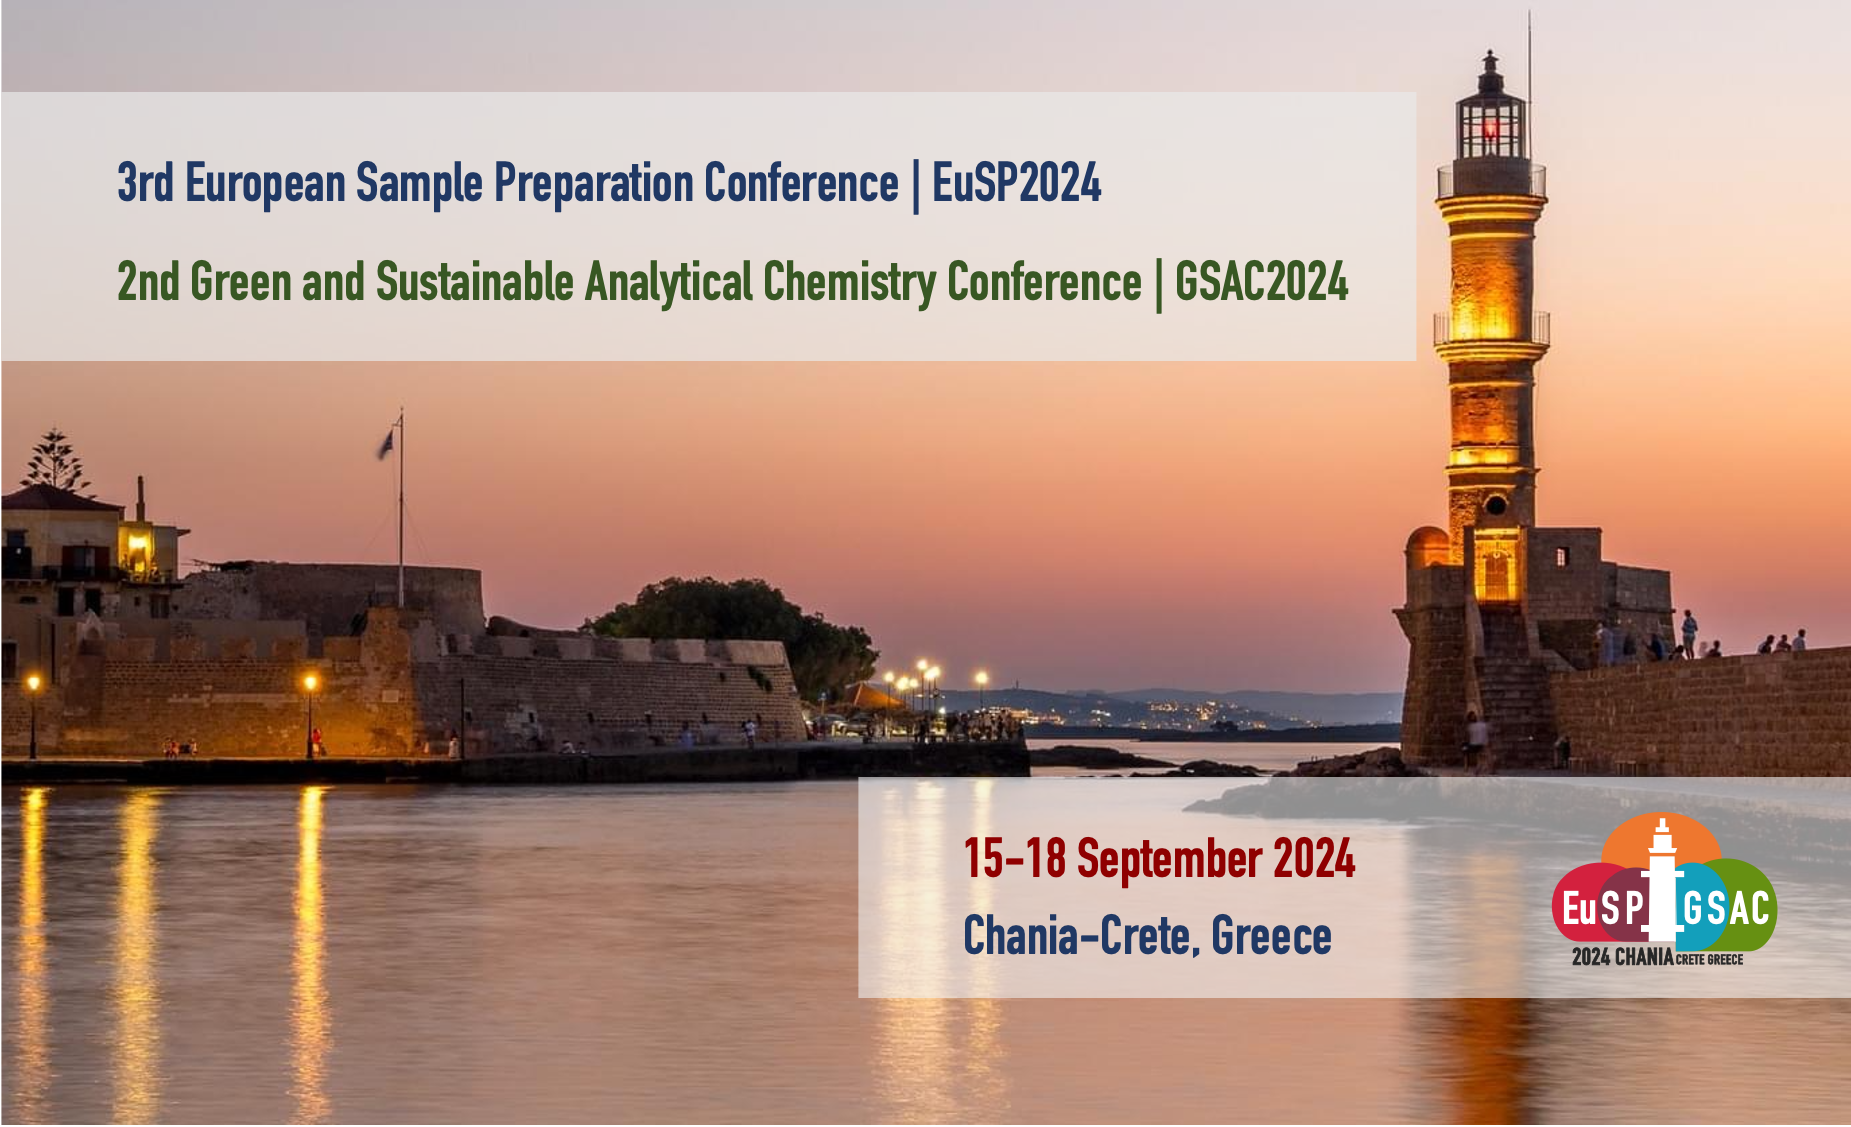 3rd European Sample Preparation Conference and 2nd Green and